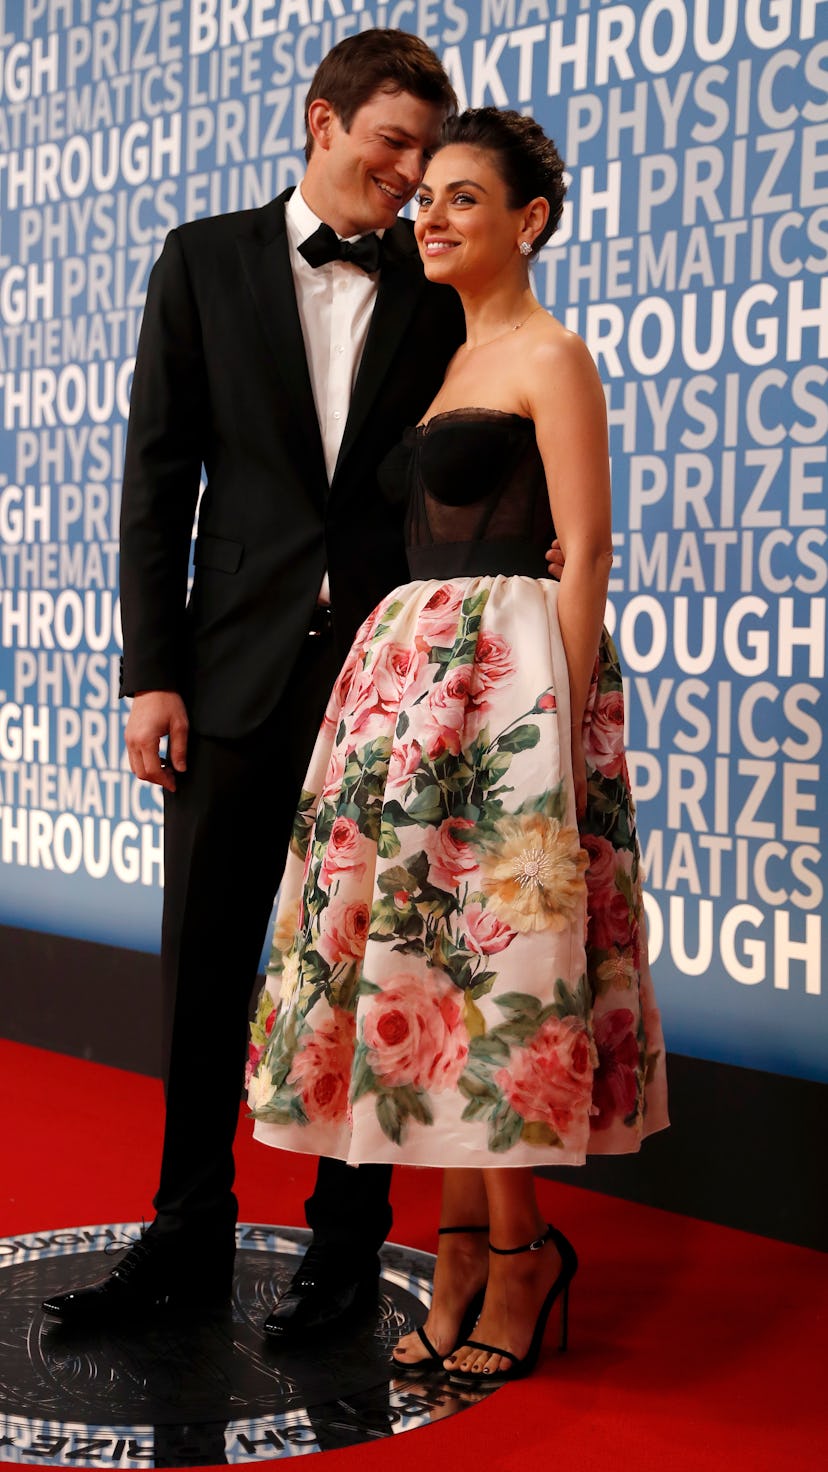 Actress Mila Kunis poses for a picture with her husband actor Ashton Kutcher on the red carpet for t...